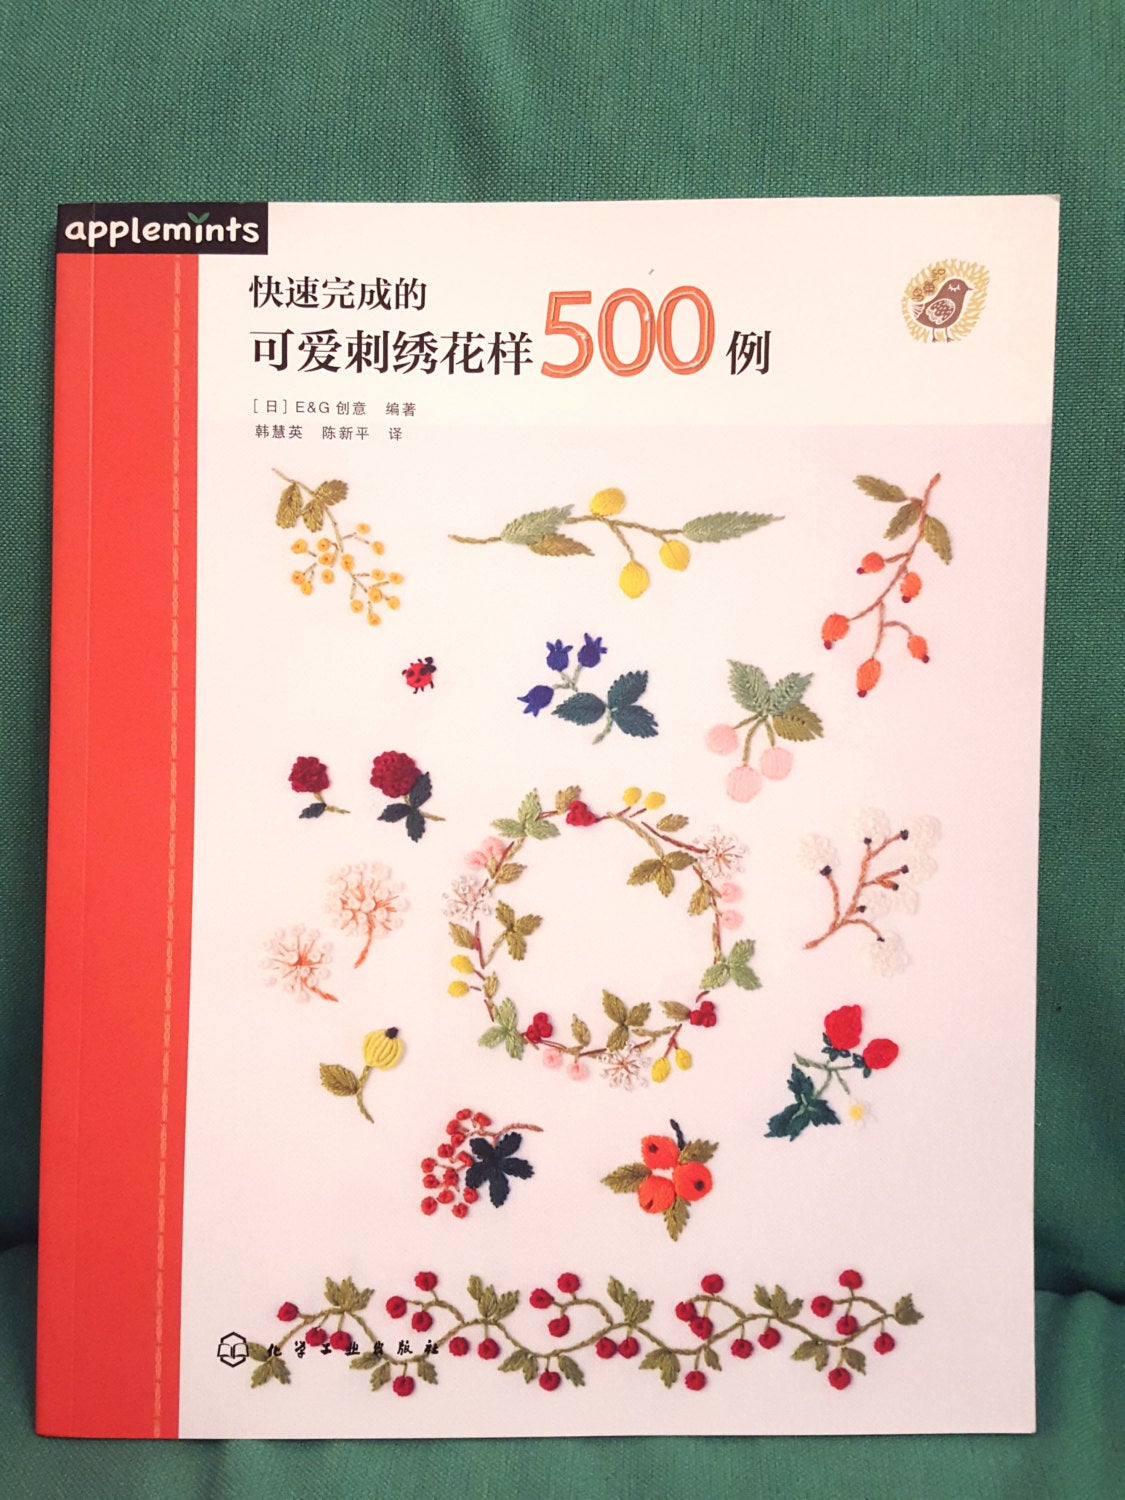 Embroidery By Hand Patterns Embroidery Book 500 Easy And Cute Embroidery Patterns Japanese